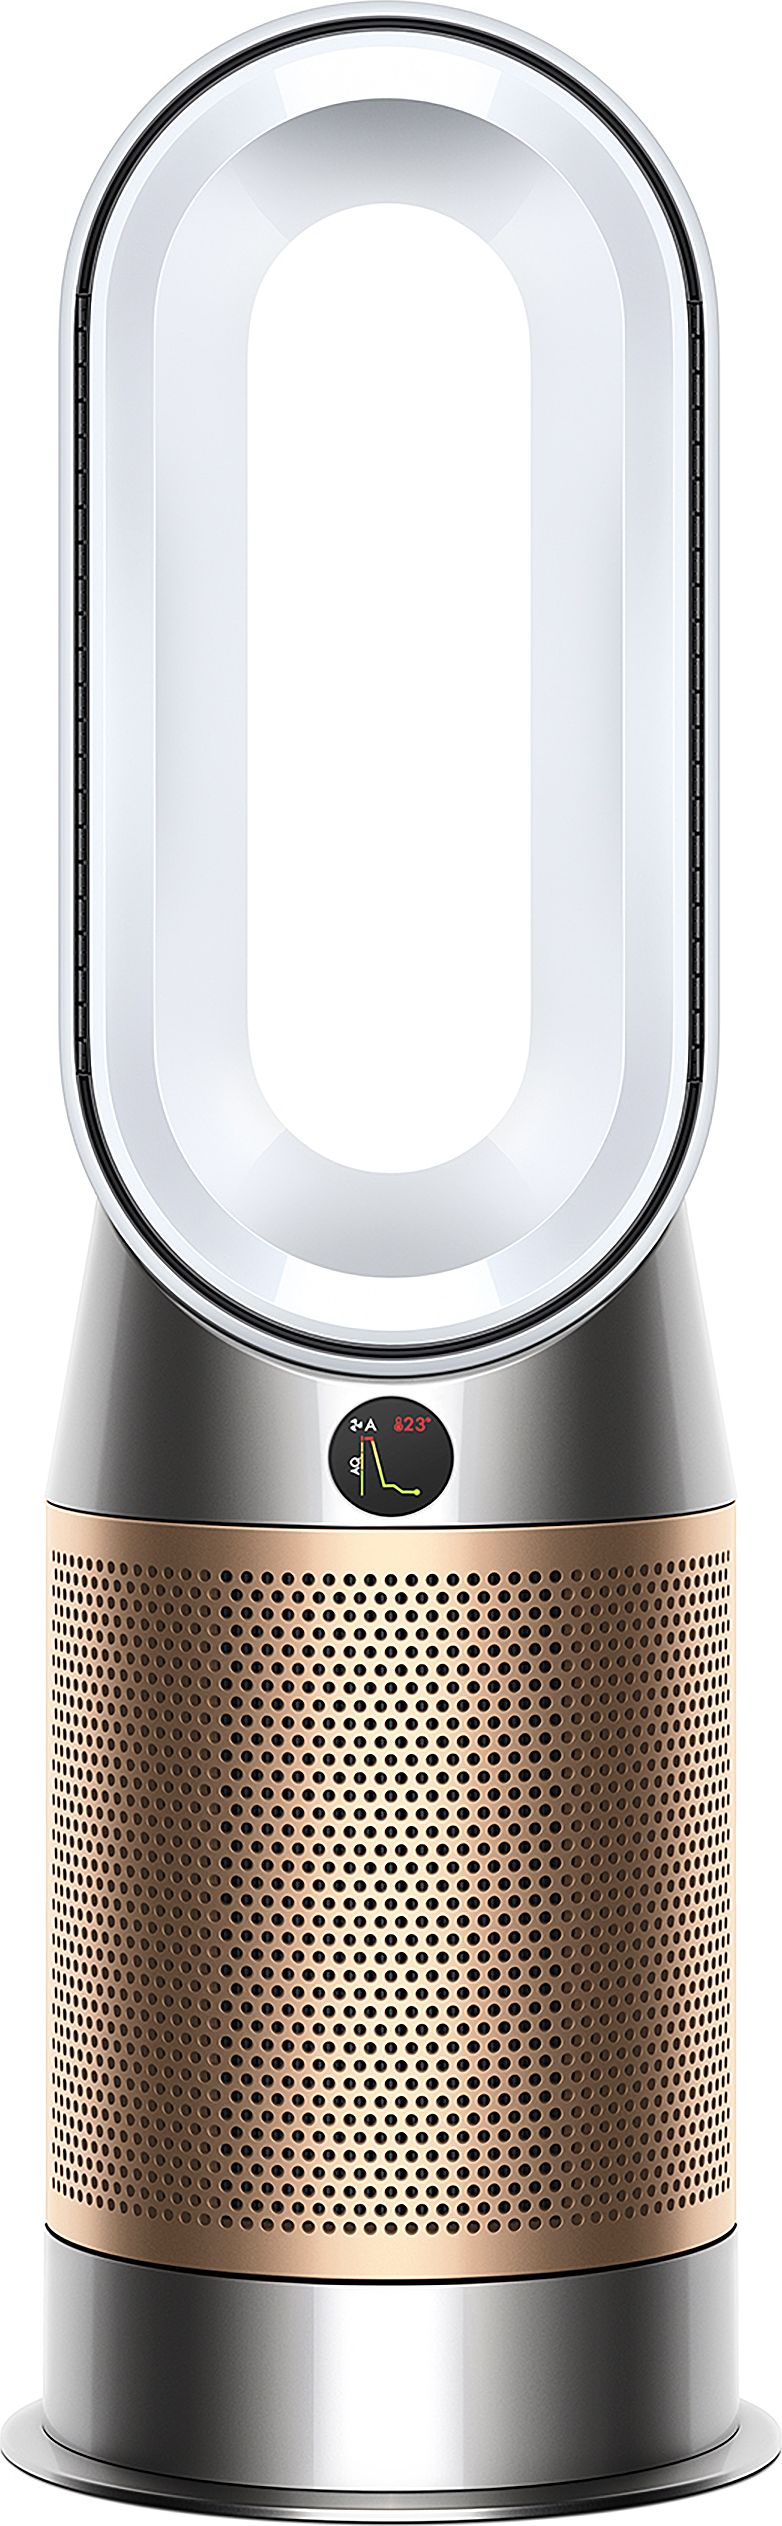 Dyson Hot+Cool HP09 Air Purifier with Fan Cooling - Silver / Chrome, Silver